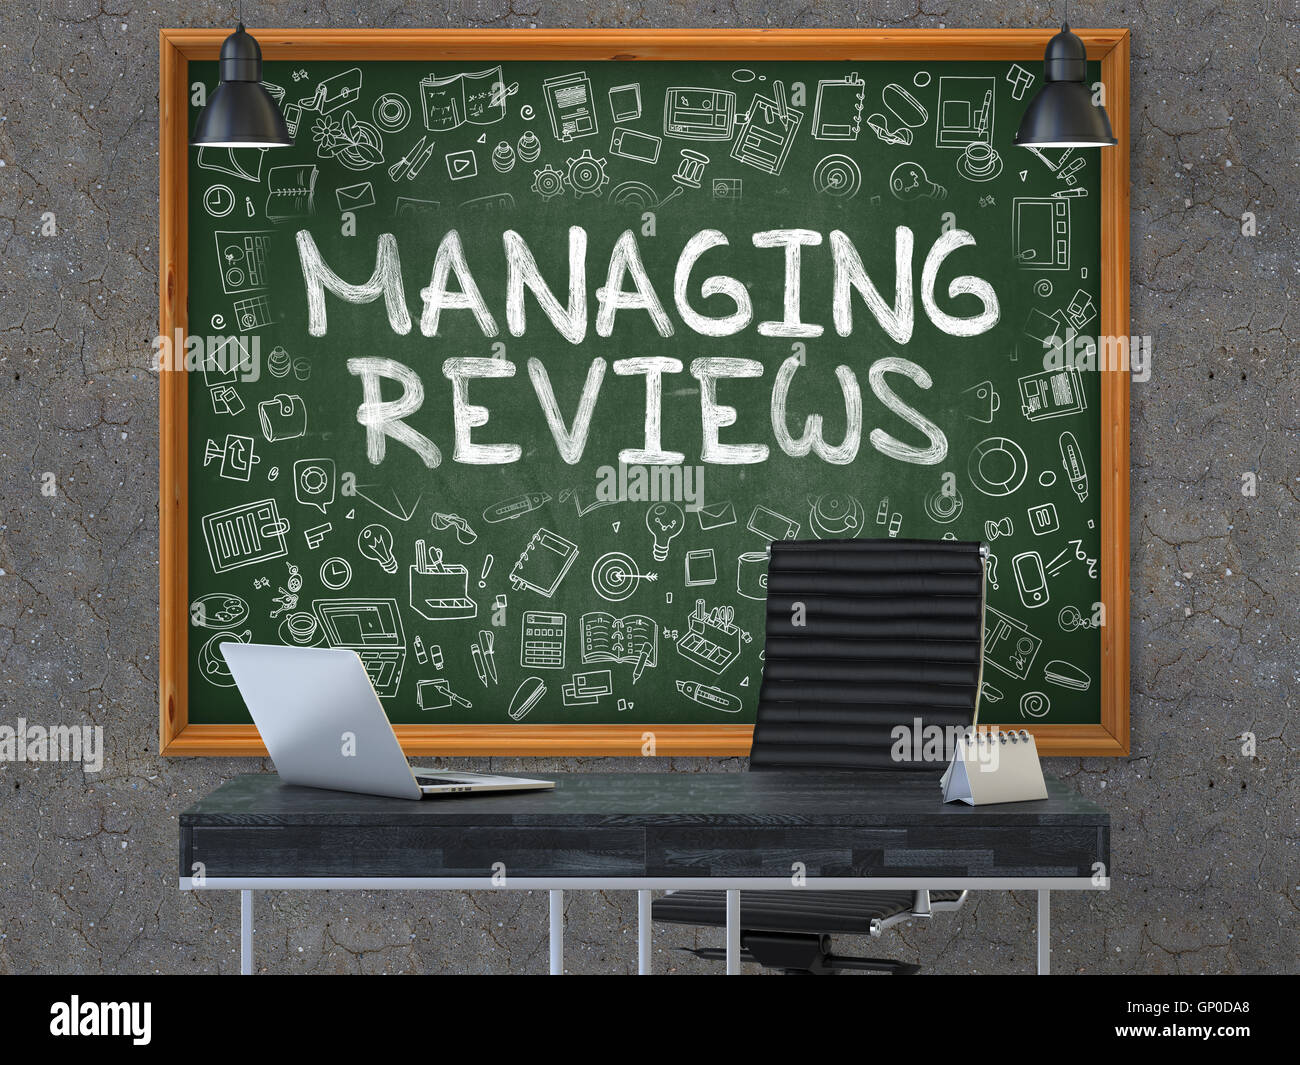 Managing Reviews Concept Handwritten on Green Chalkboard with Doodle Icons. Office Interior with Modern Workplace. Dark Old Conc Stock Photo